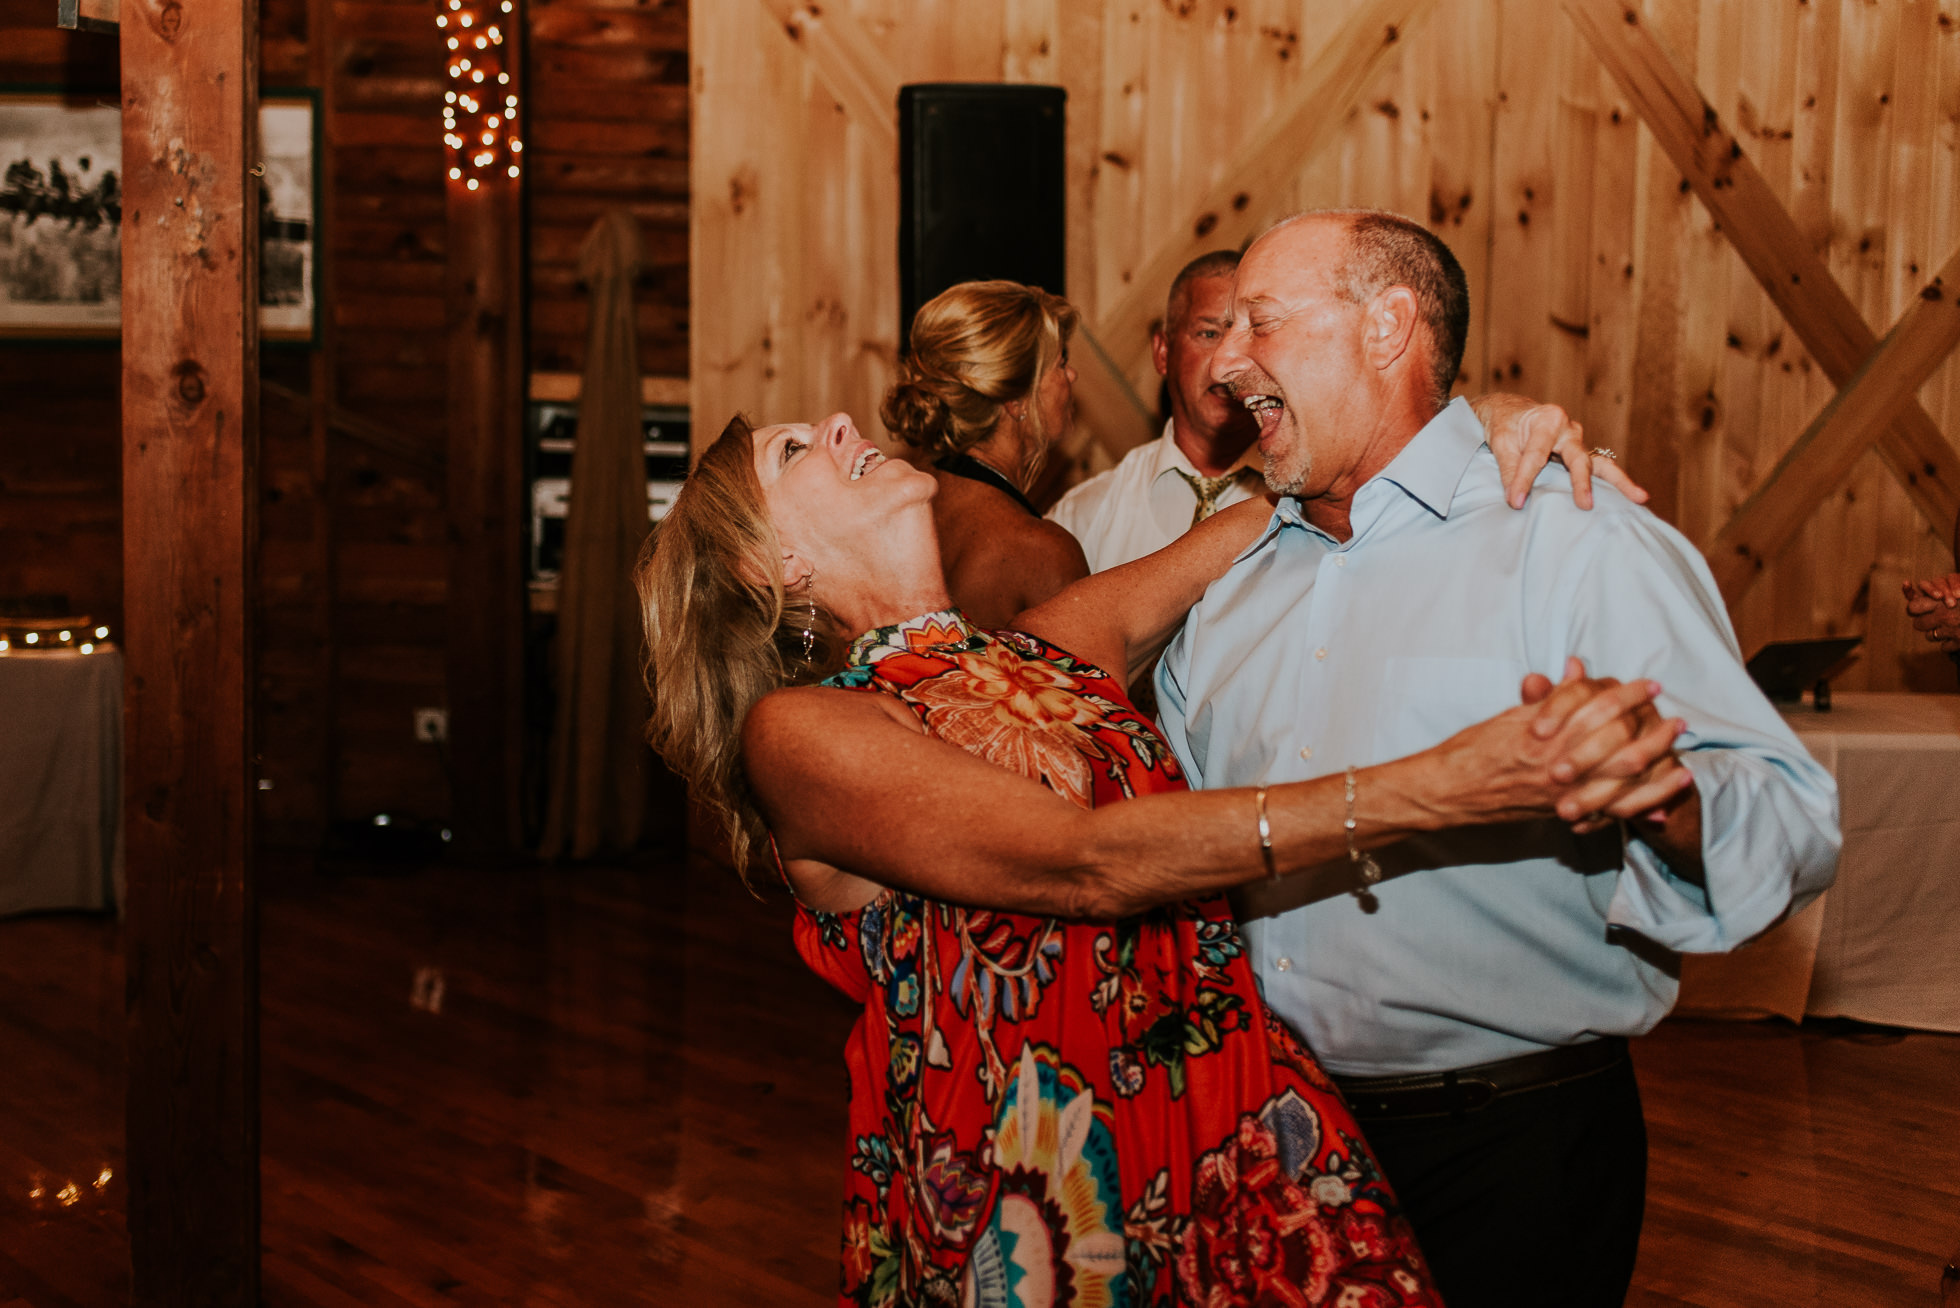 guests dancing at olde tater barn wedding in central bridge, ny photographed by traverse the tides